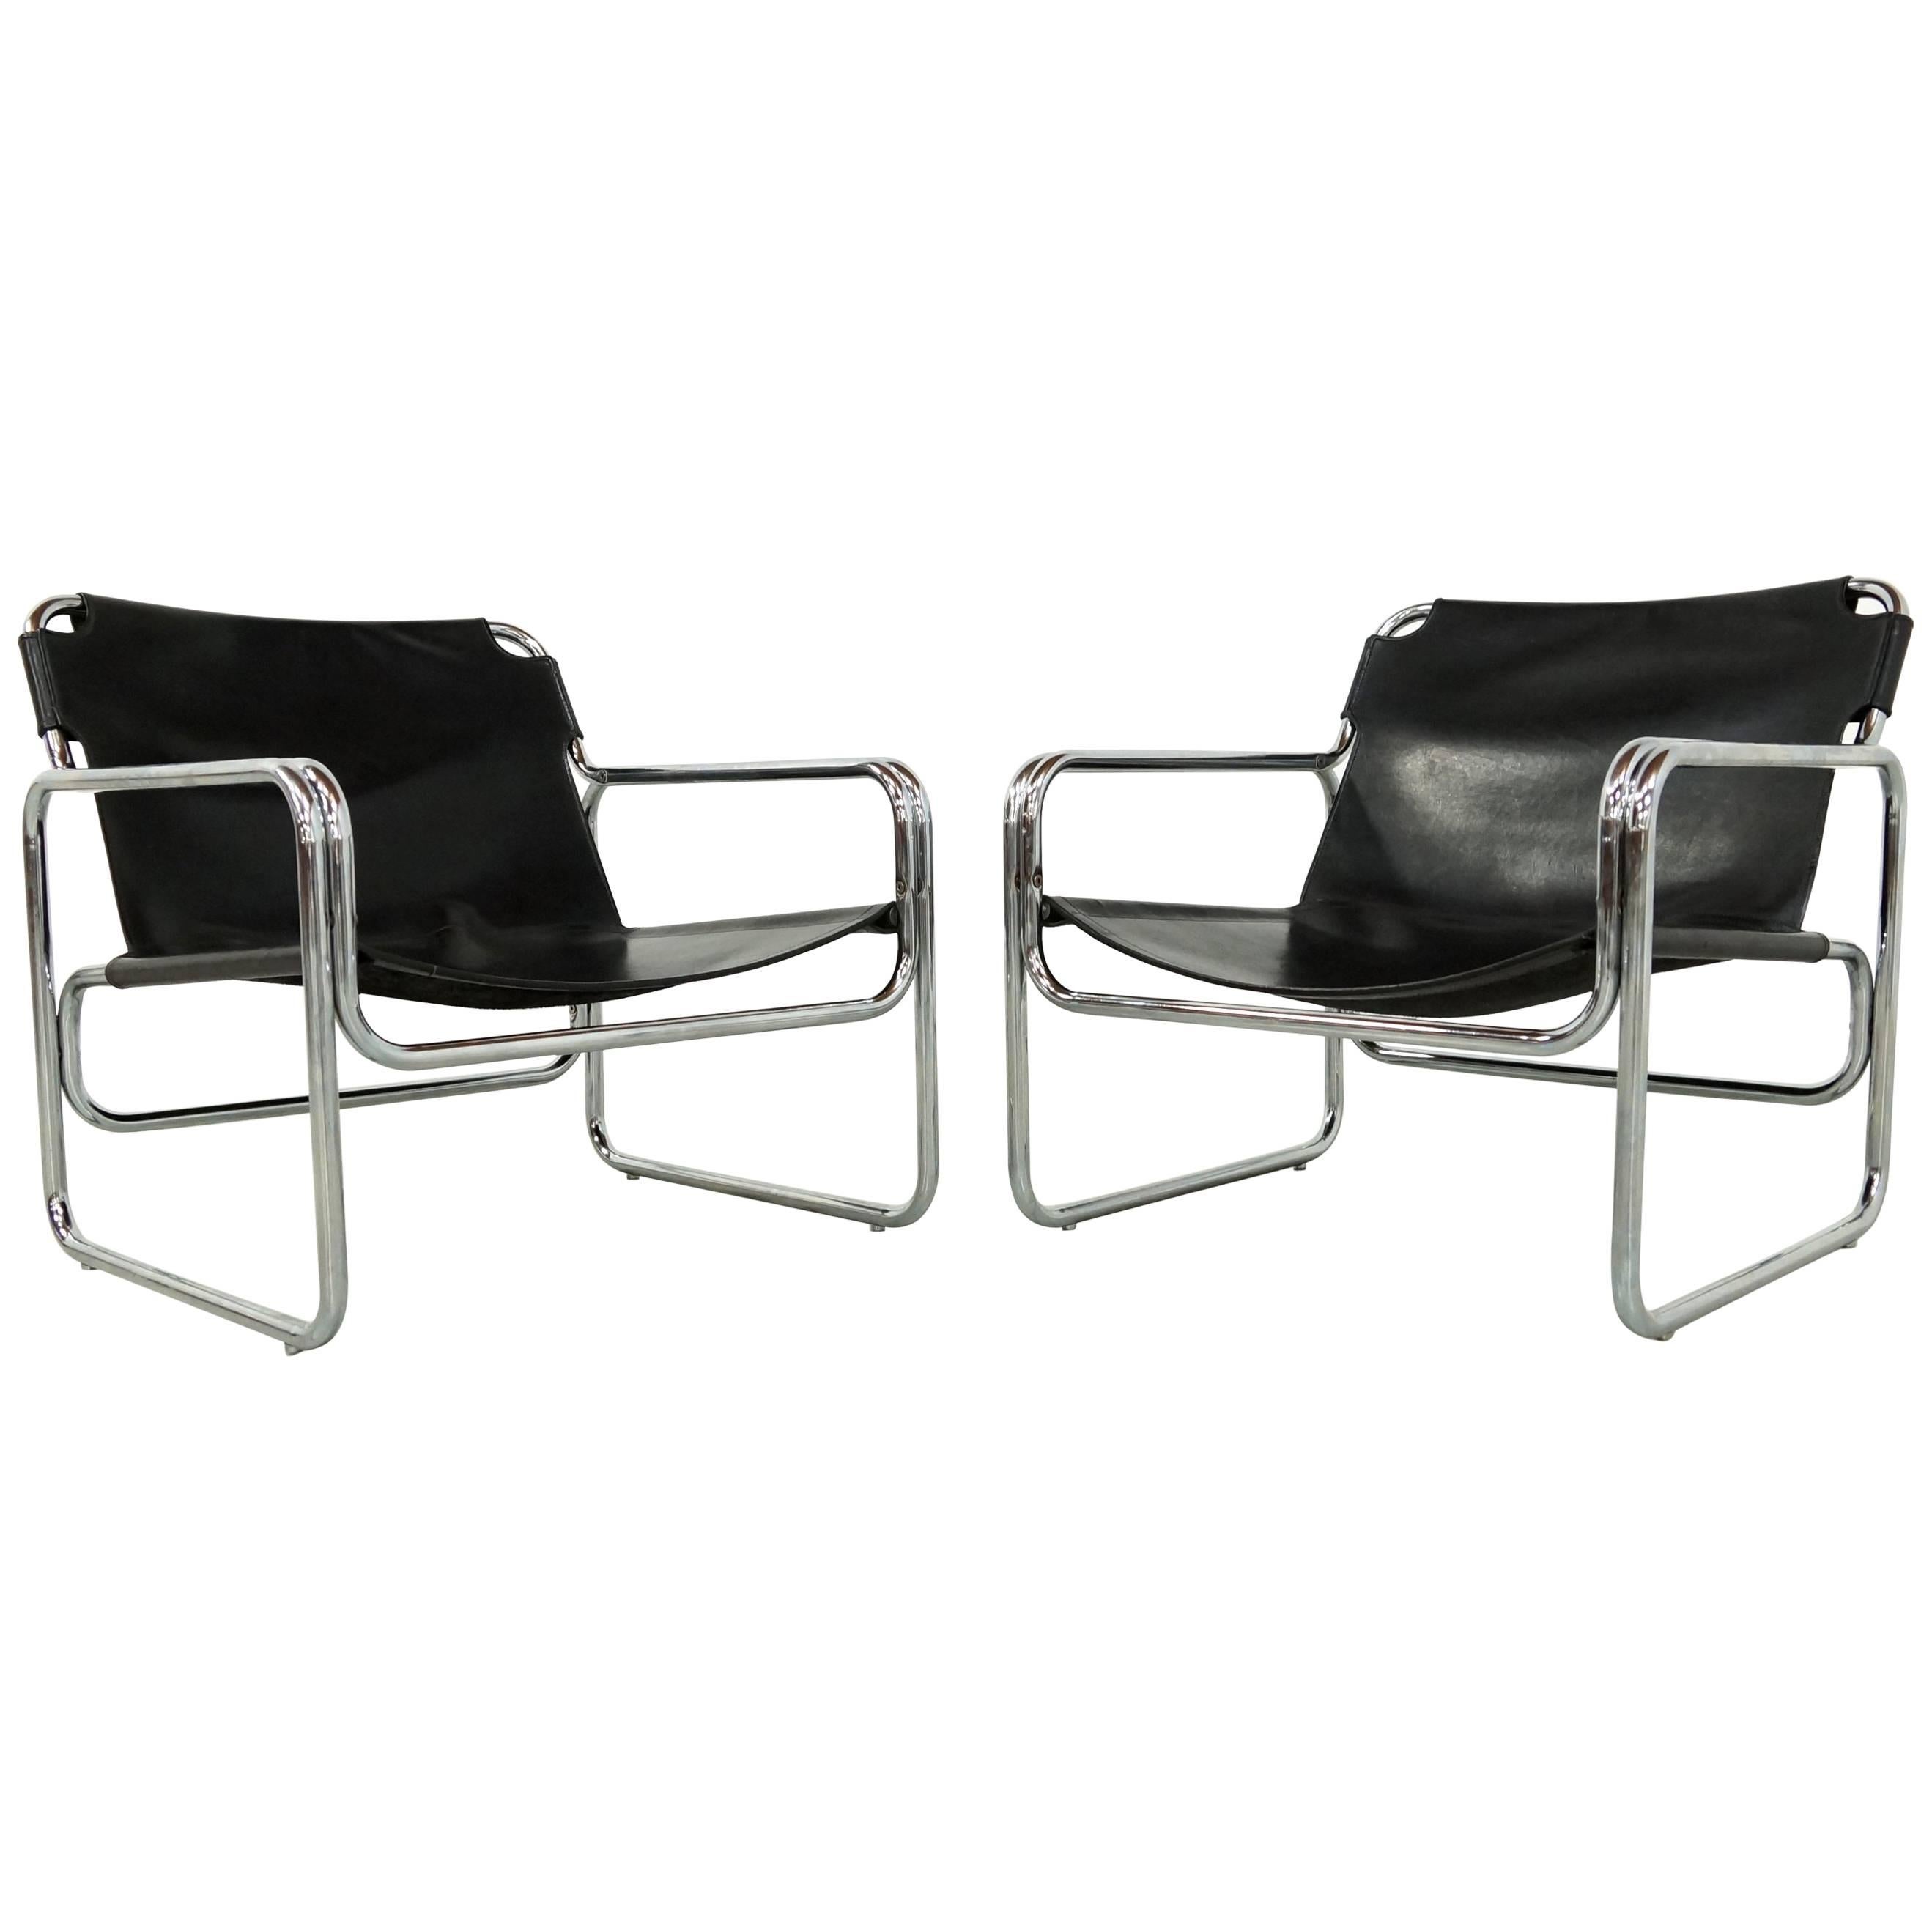 Pair of Antella Mosca Black Leather Lounge Chairs, Model Attico 1970, s 